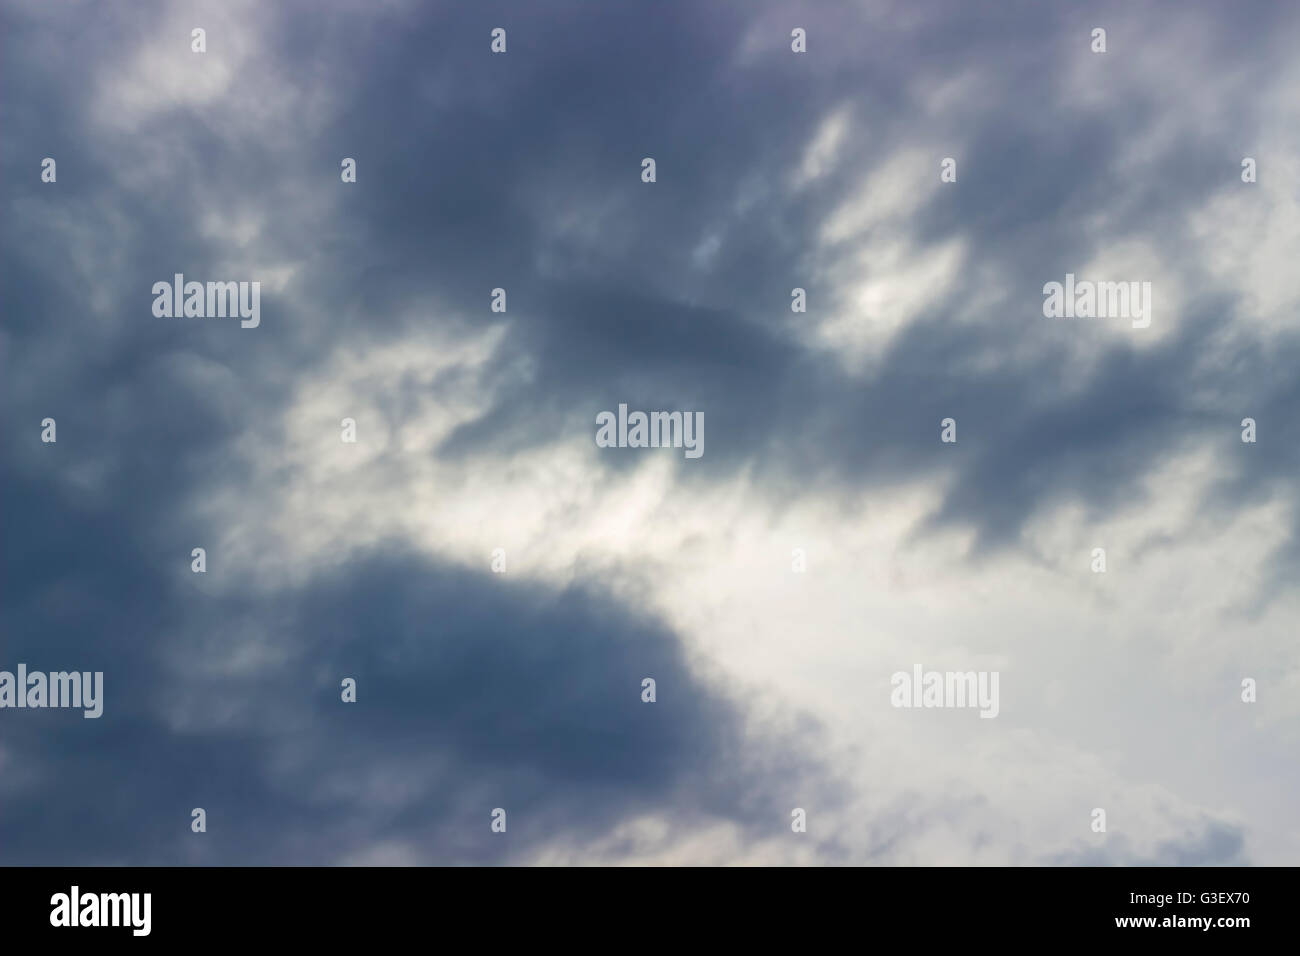 Abstract background of clouds in the sky. Stock Photo